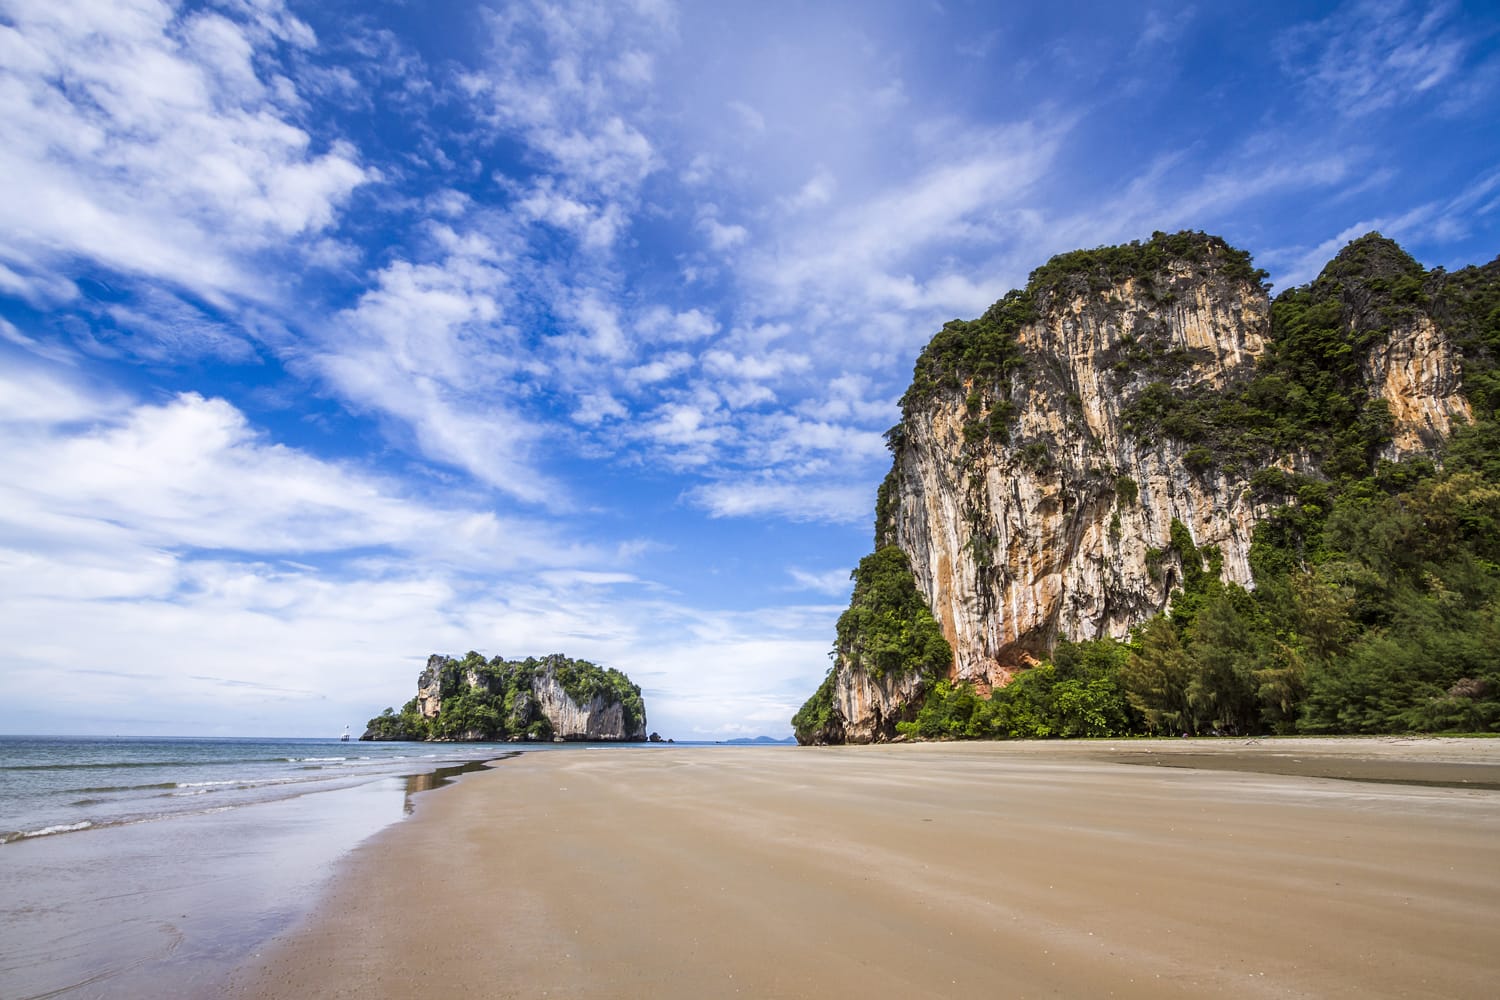 Cliff in Hat Chao Mai national park beach, Trang province, Thailand